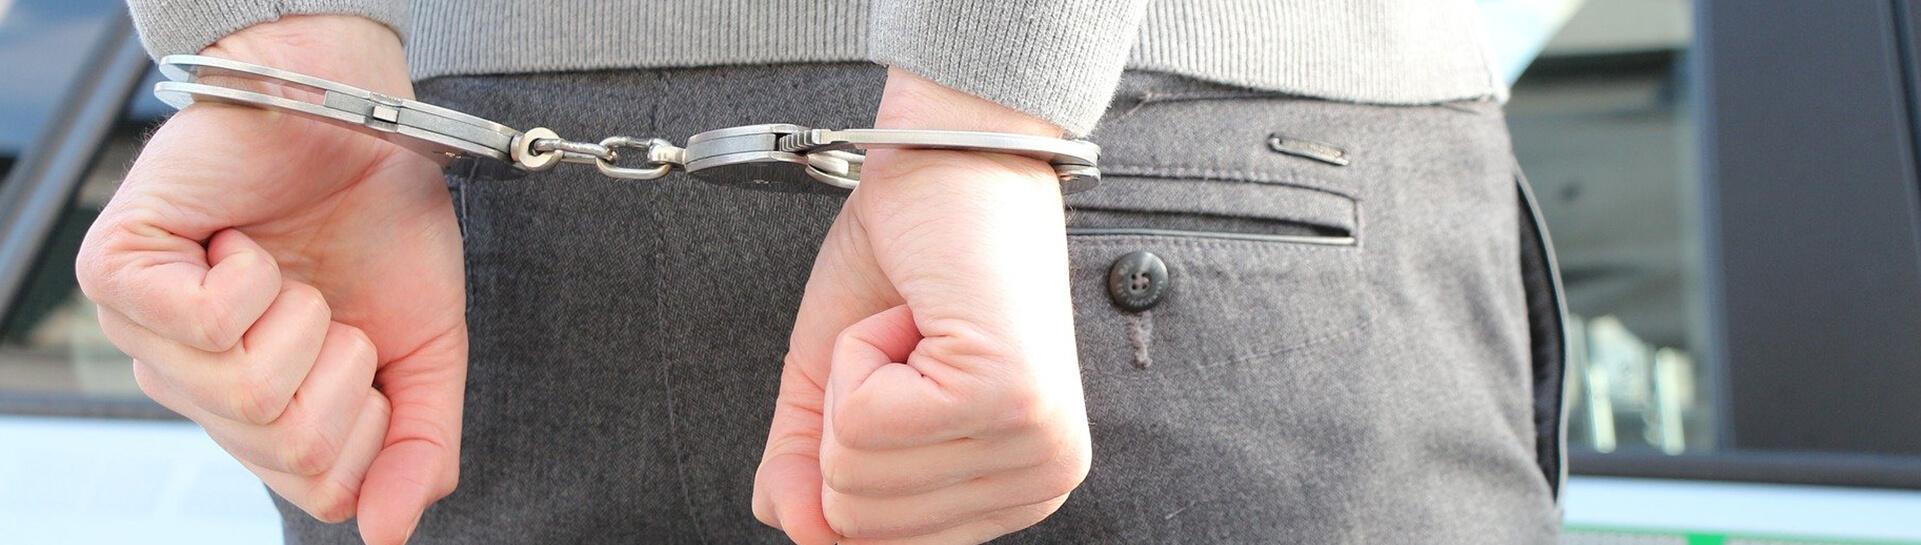 A person's hands in handcuffs